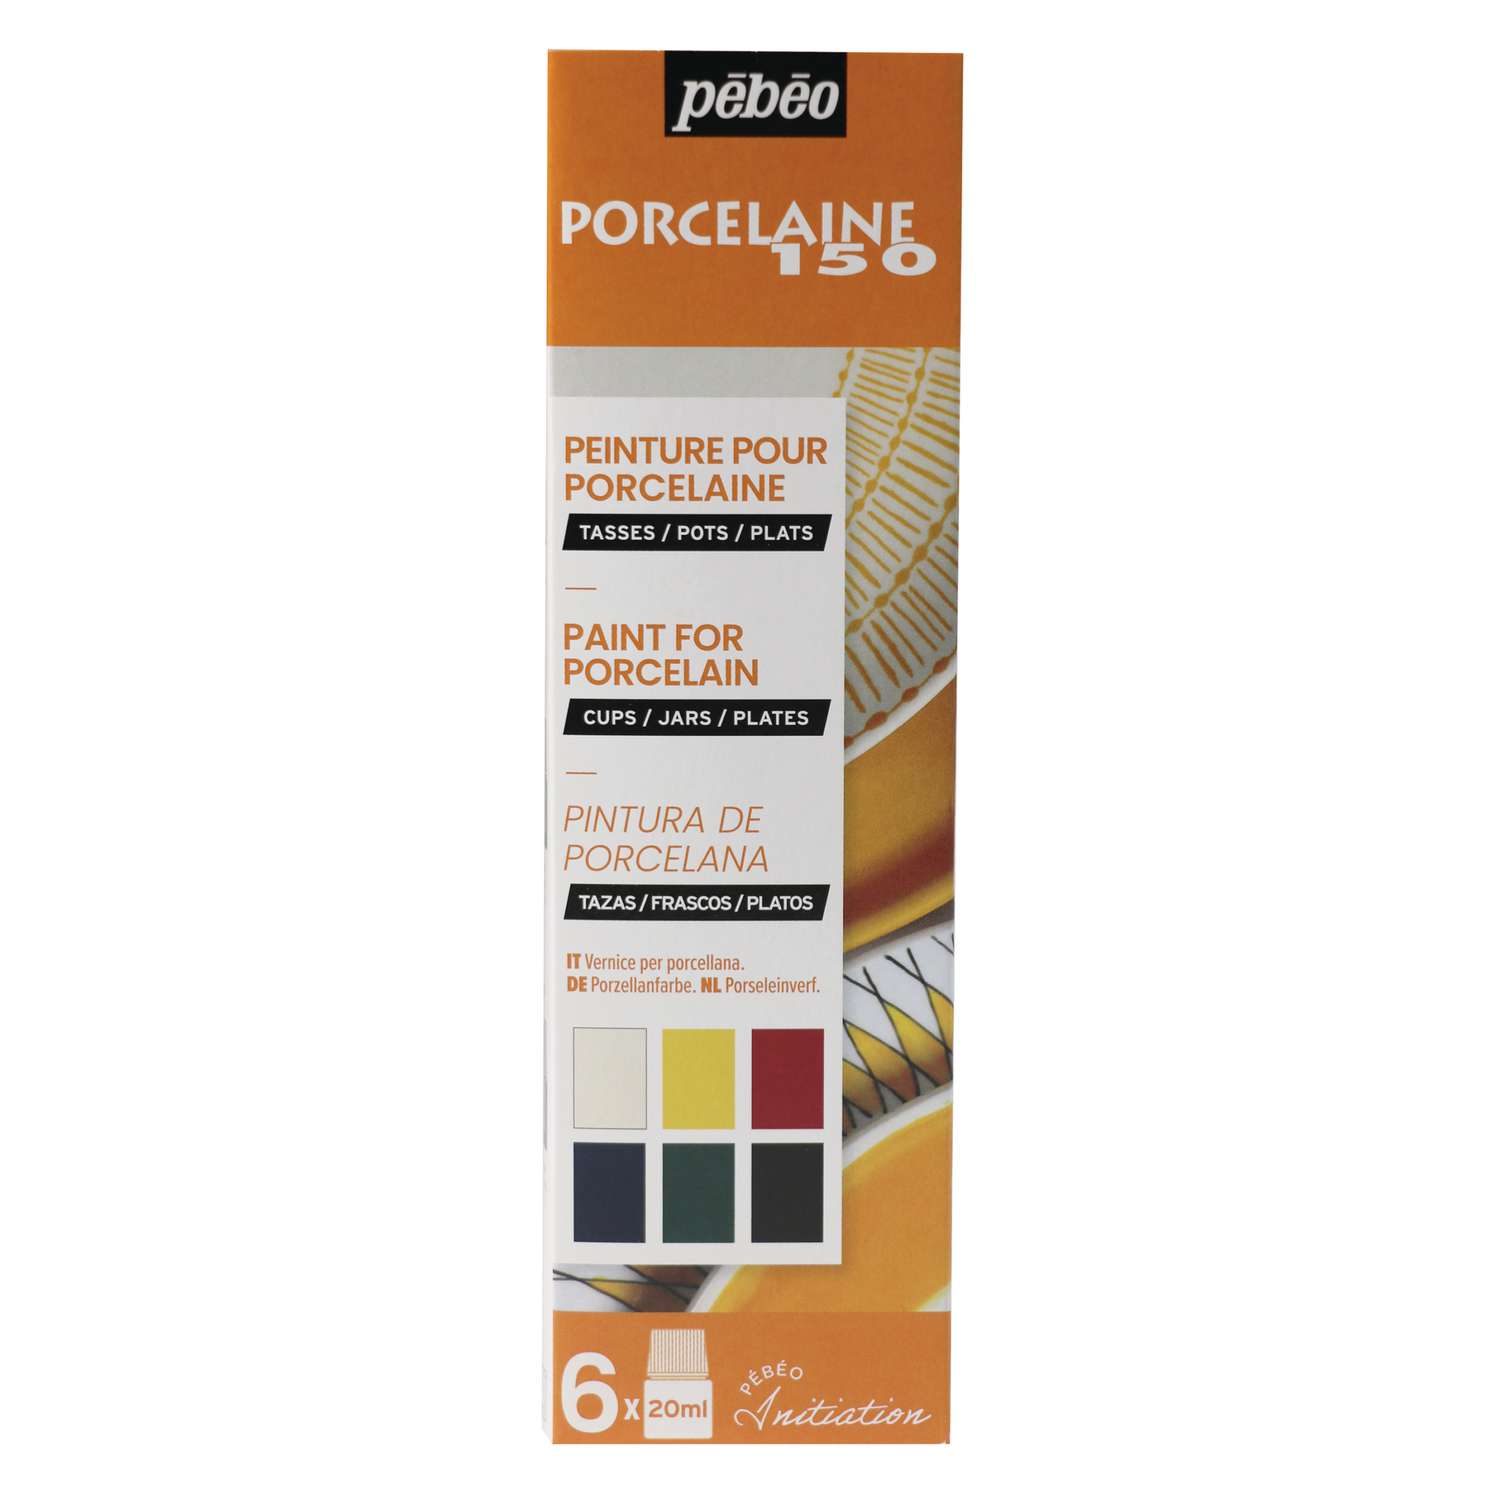 Pebeo Porcelaine 150 Paint Outliner, Gold | 20 ml